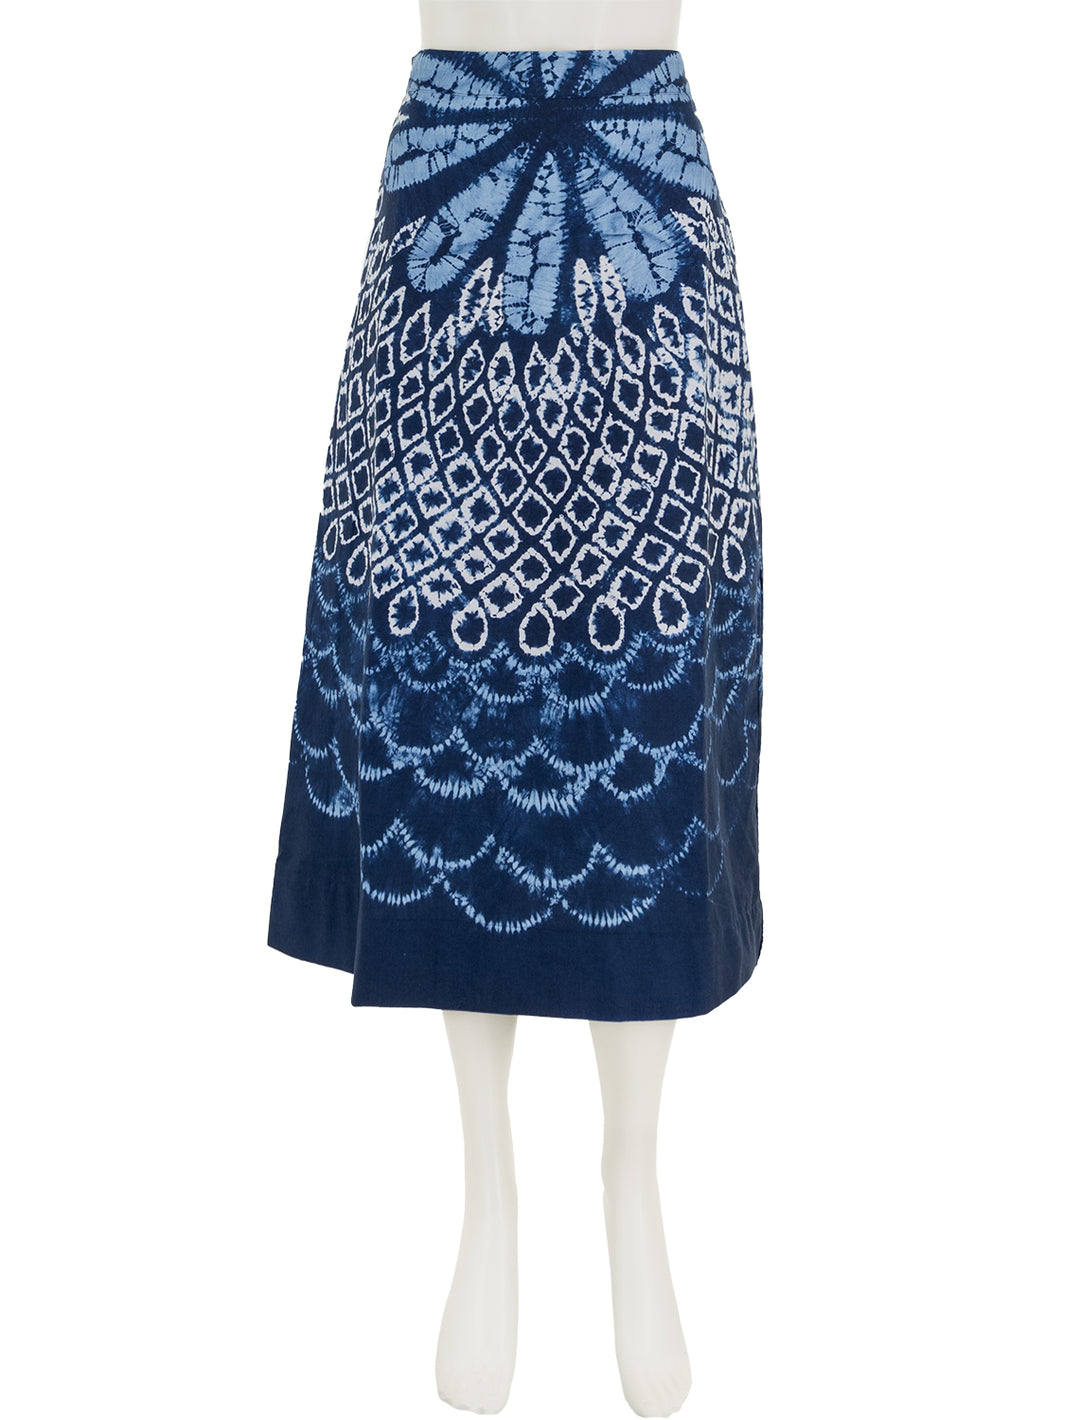 Front view of Sea NY's blythe dye print skirt